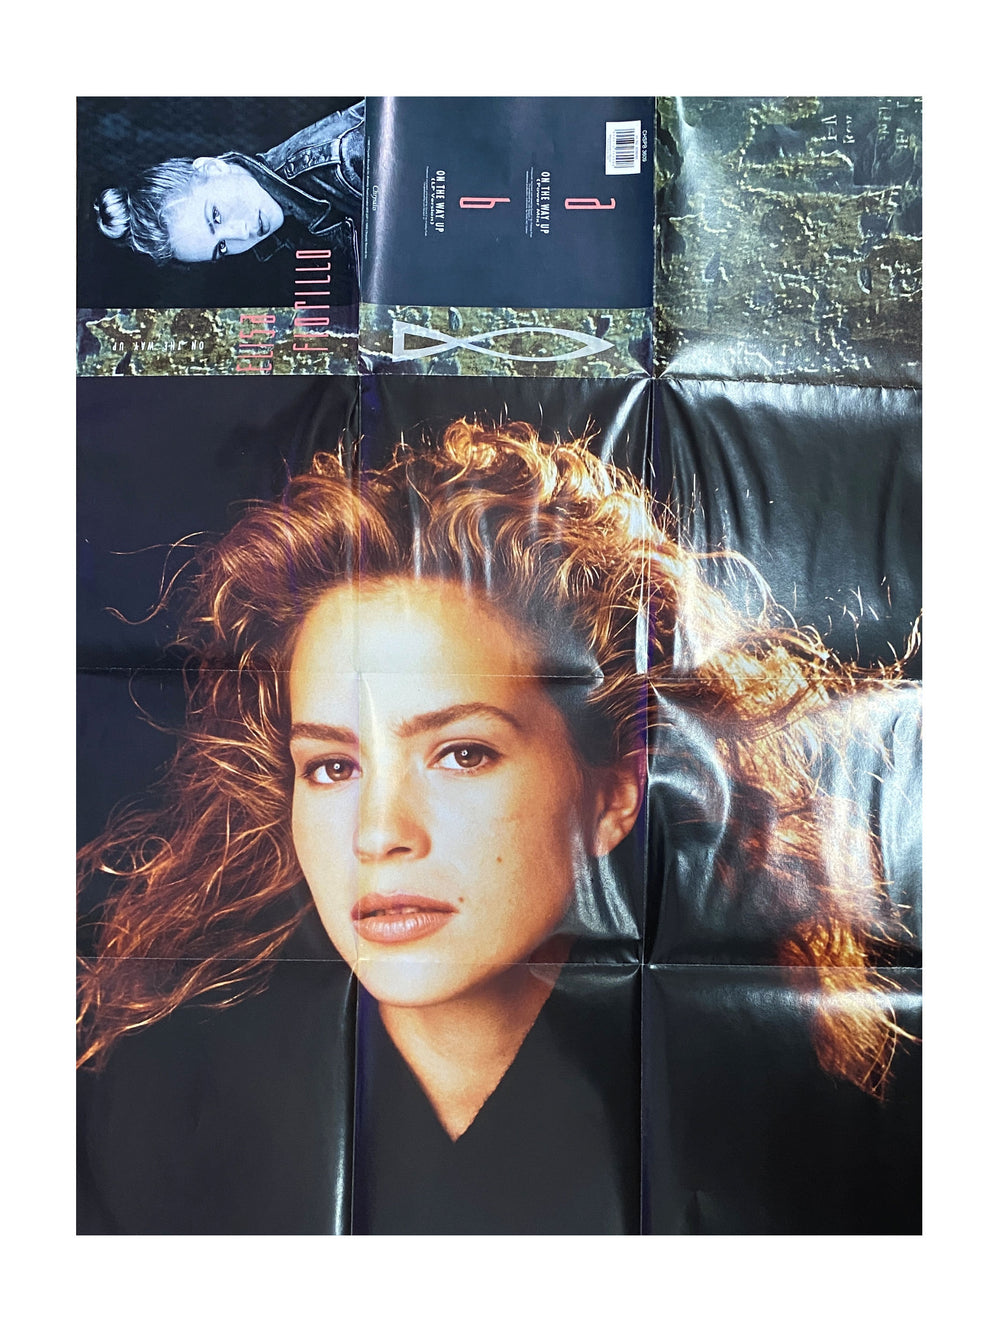 Prince – Elisa Fiorillo On The Way Up 7 Inch Vinyl Single 1990 Poster Bag UK Written By Prince EX